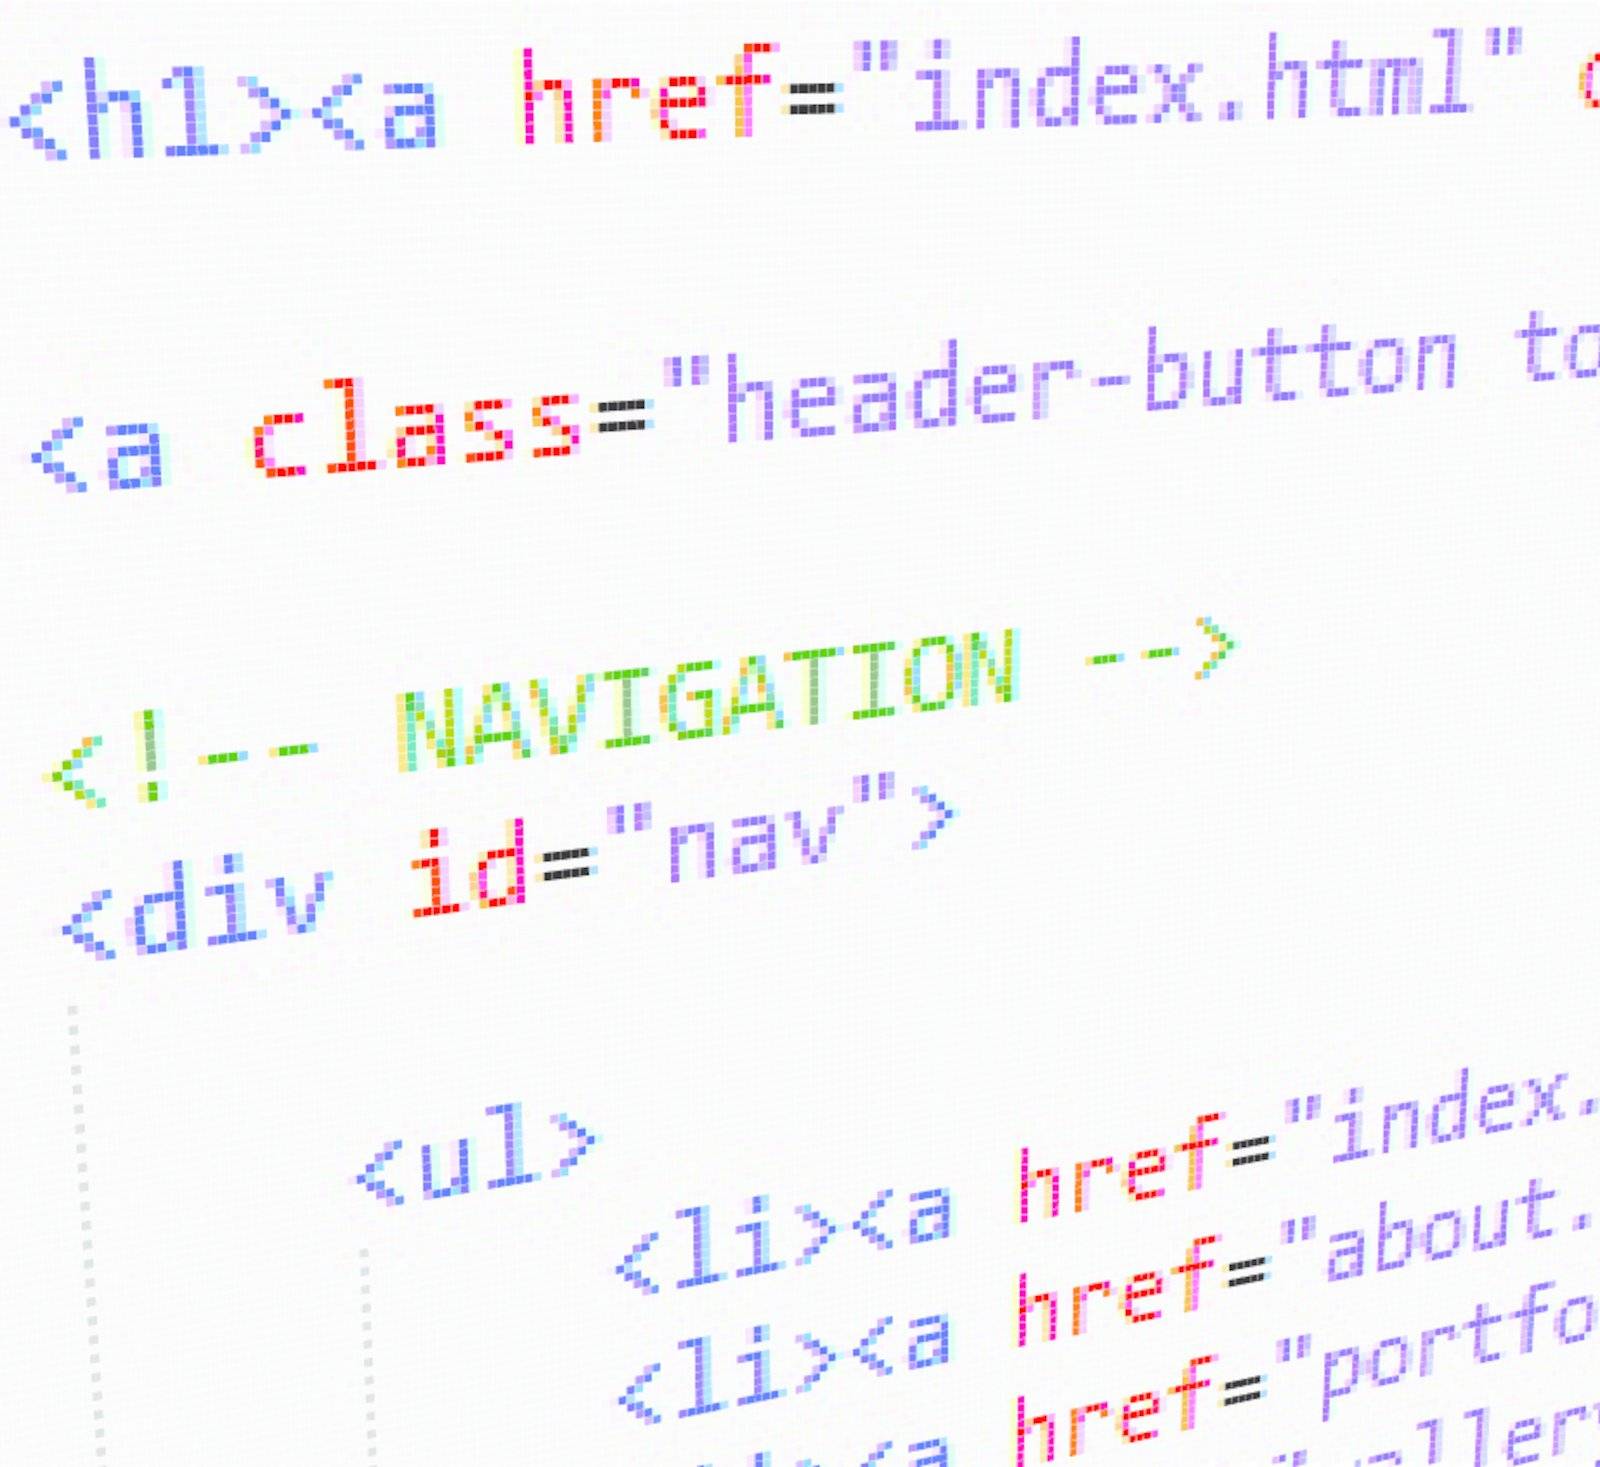 CSS and HTML code by vtorous